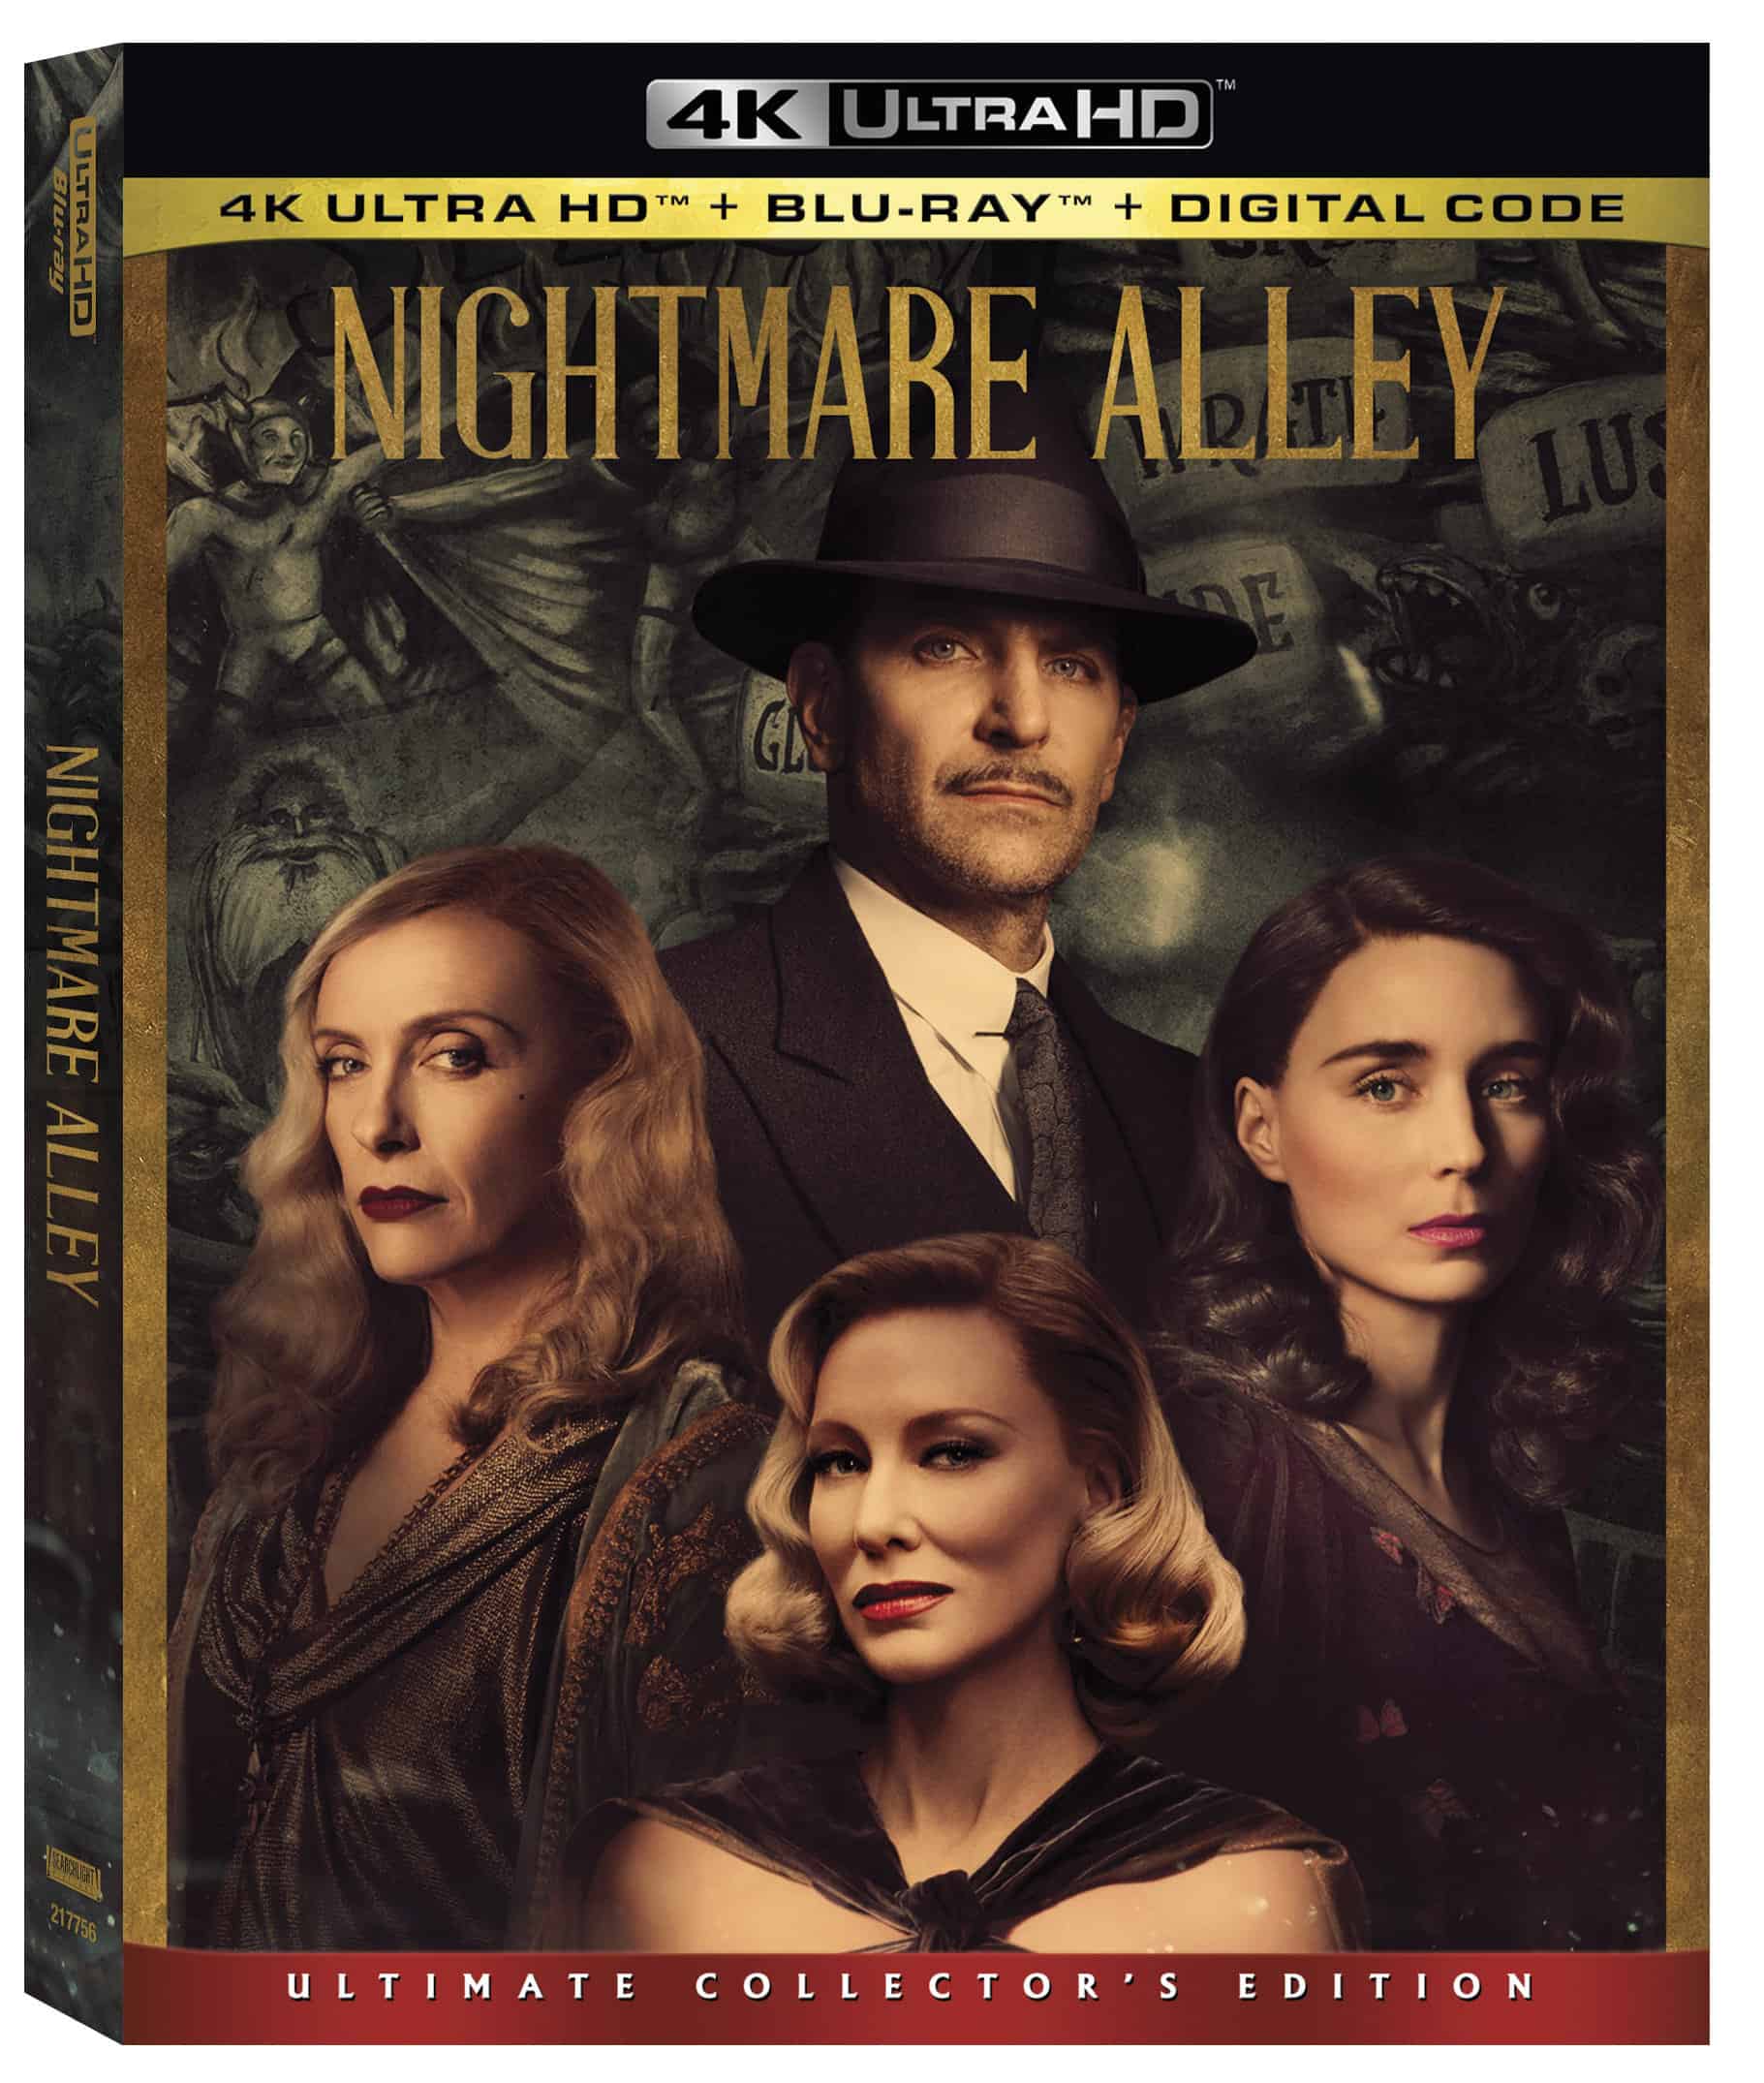 Nightmare Alley comes to Digital on March 8th and Blu-ray on March 22nd 2